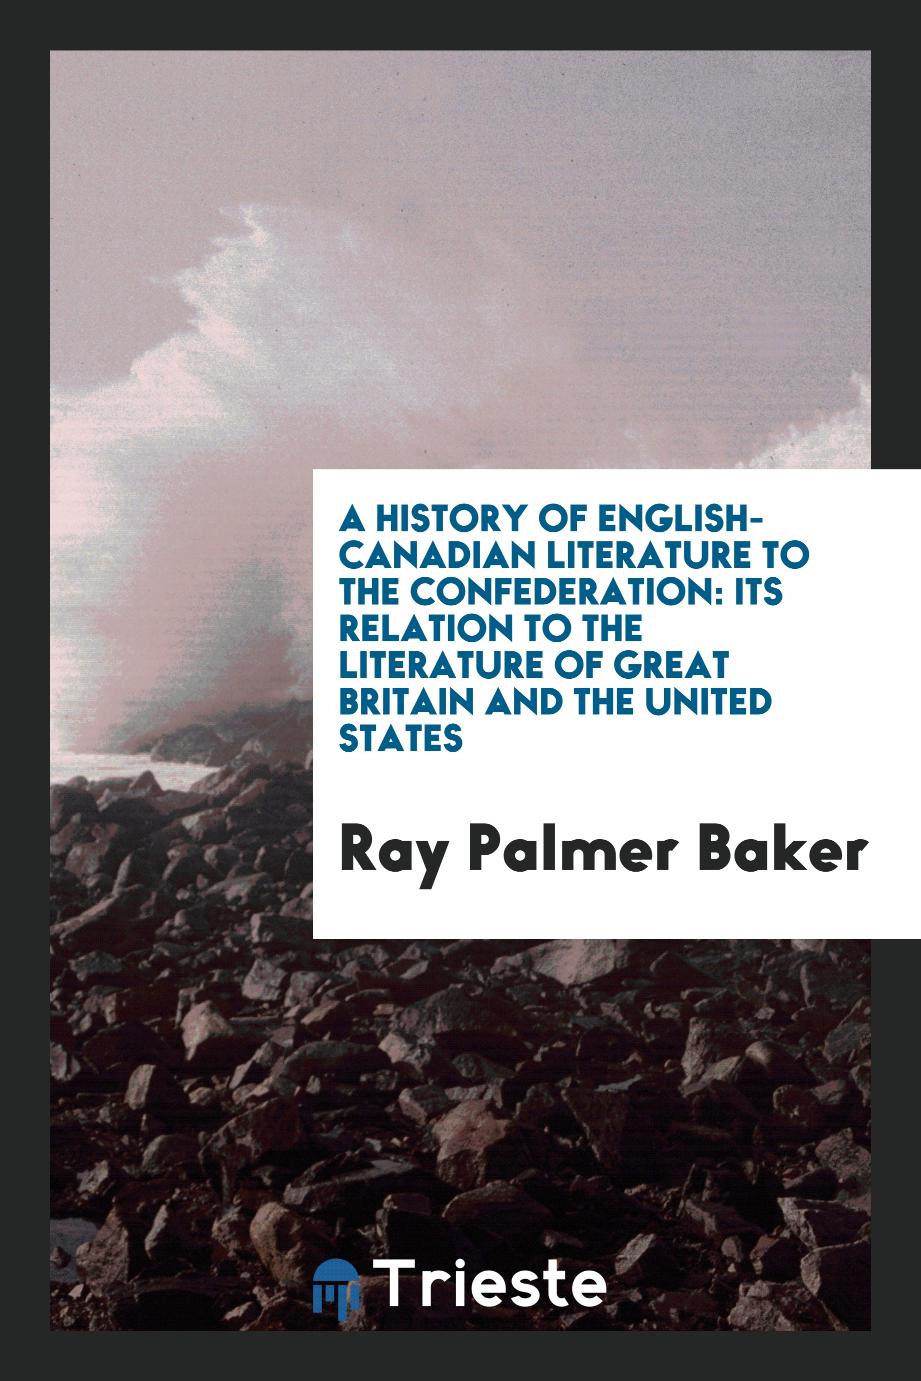 A history of English-Canadian literature to the confederation: its relation to the literature of Great Britain and the United States